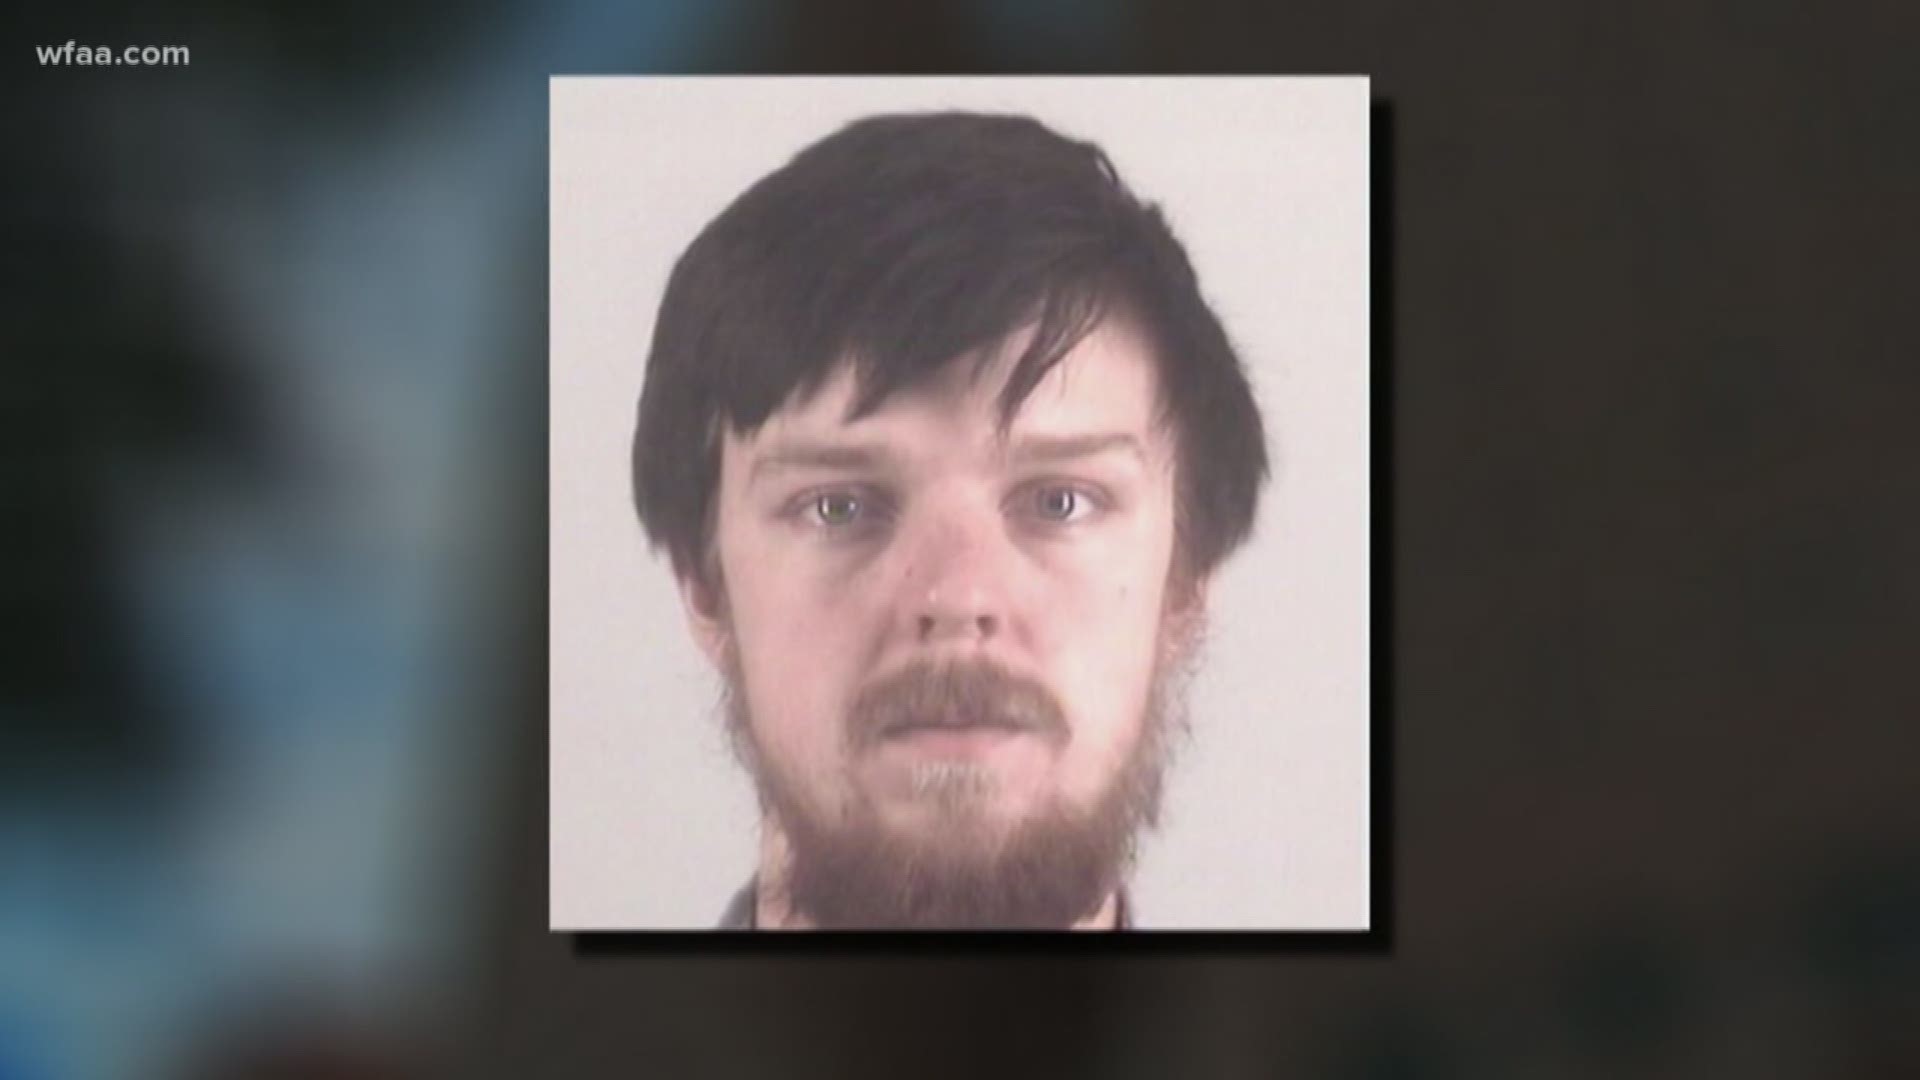 'Affluenza' teen, Ethan Couch to be released from jail Monday